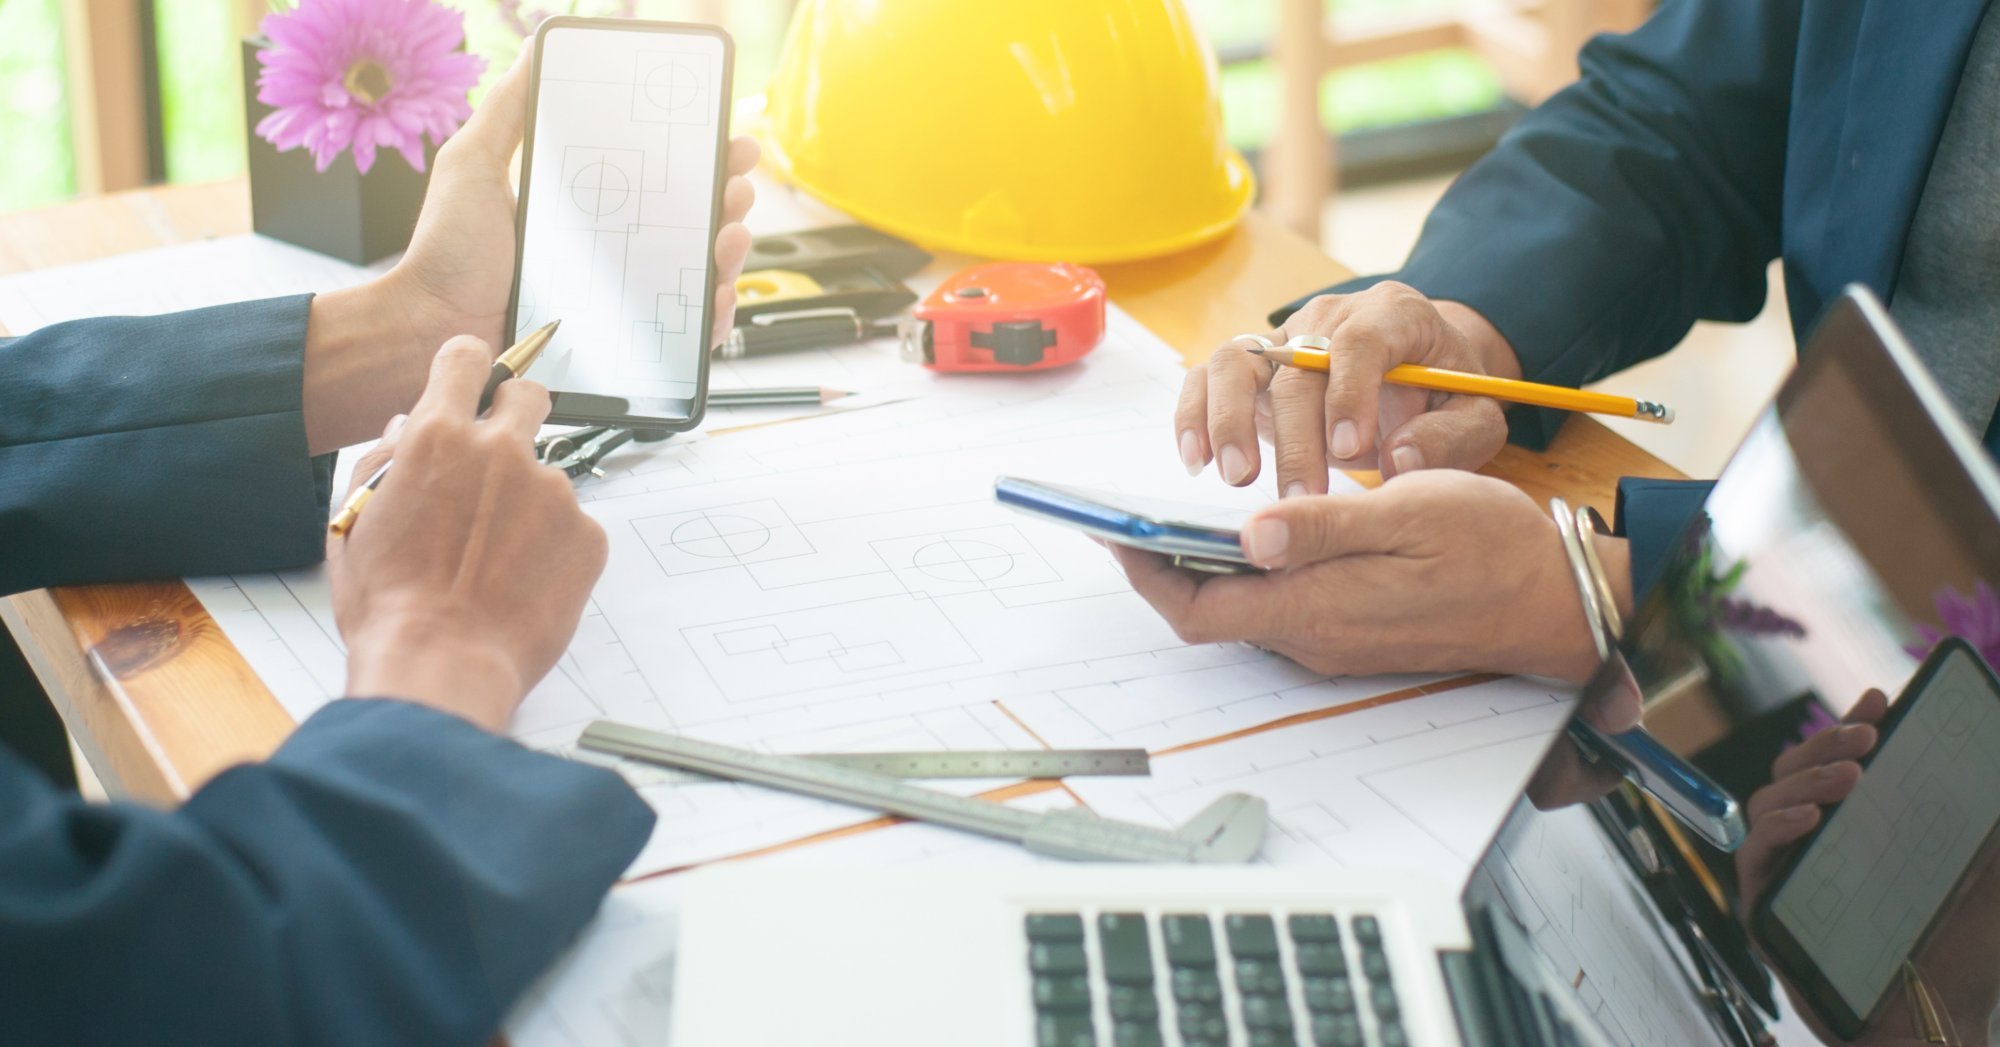 What to Look For When Choosing a Construction Lender